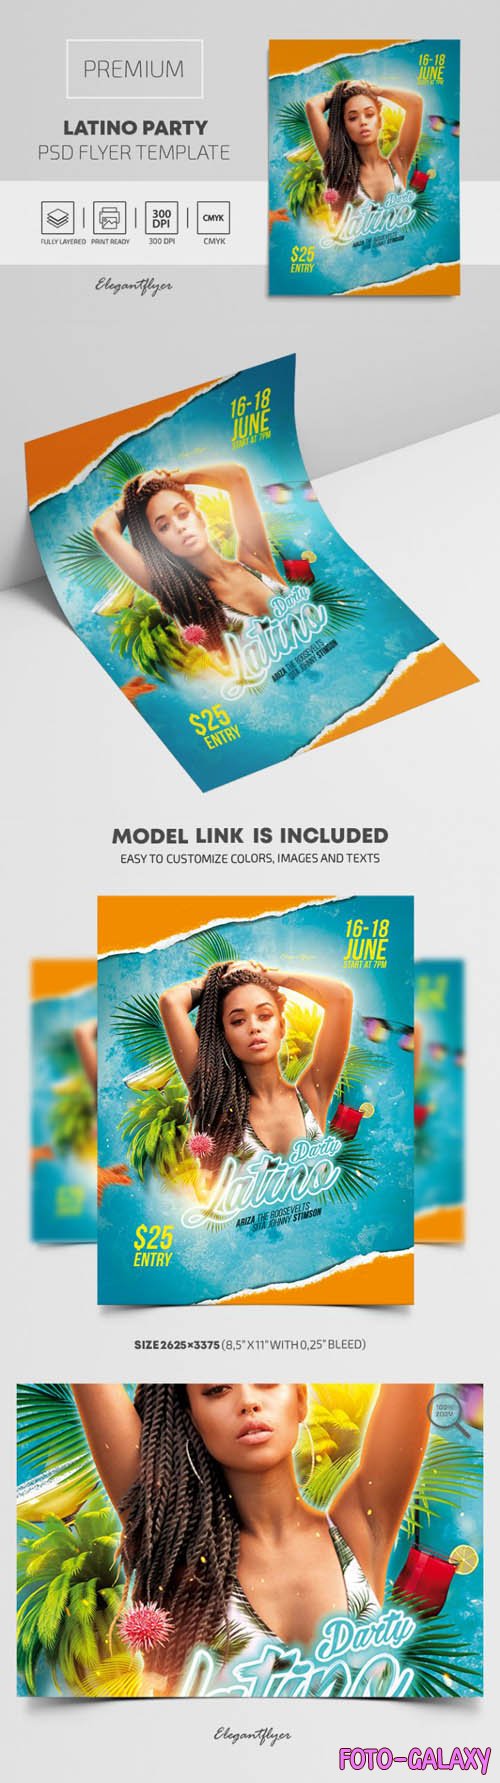 Latino Party Premium PSD Flyer Template